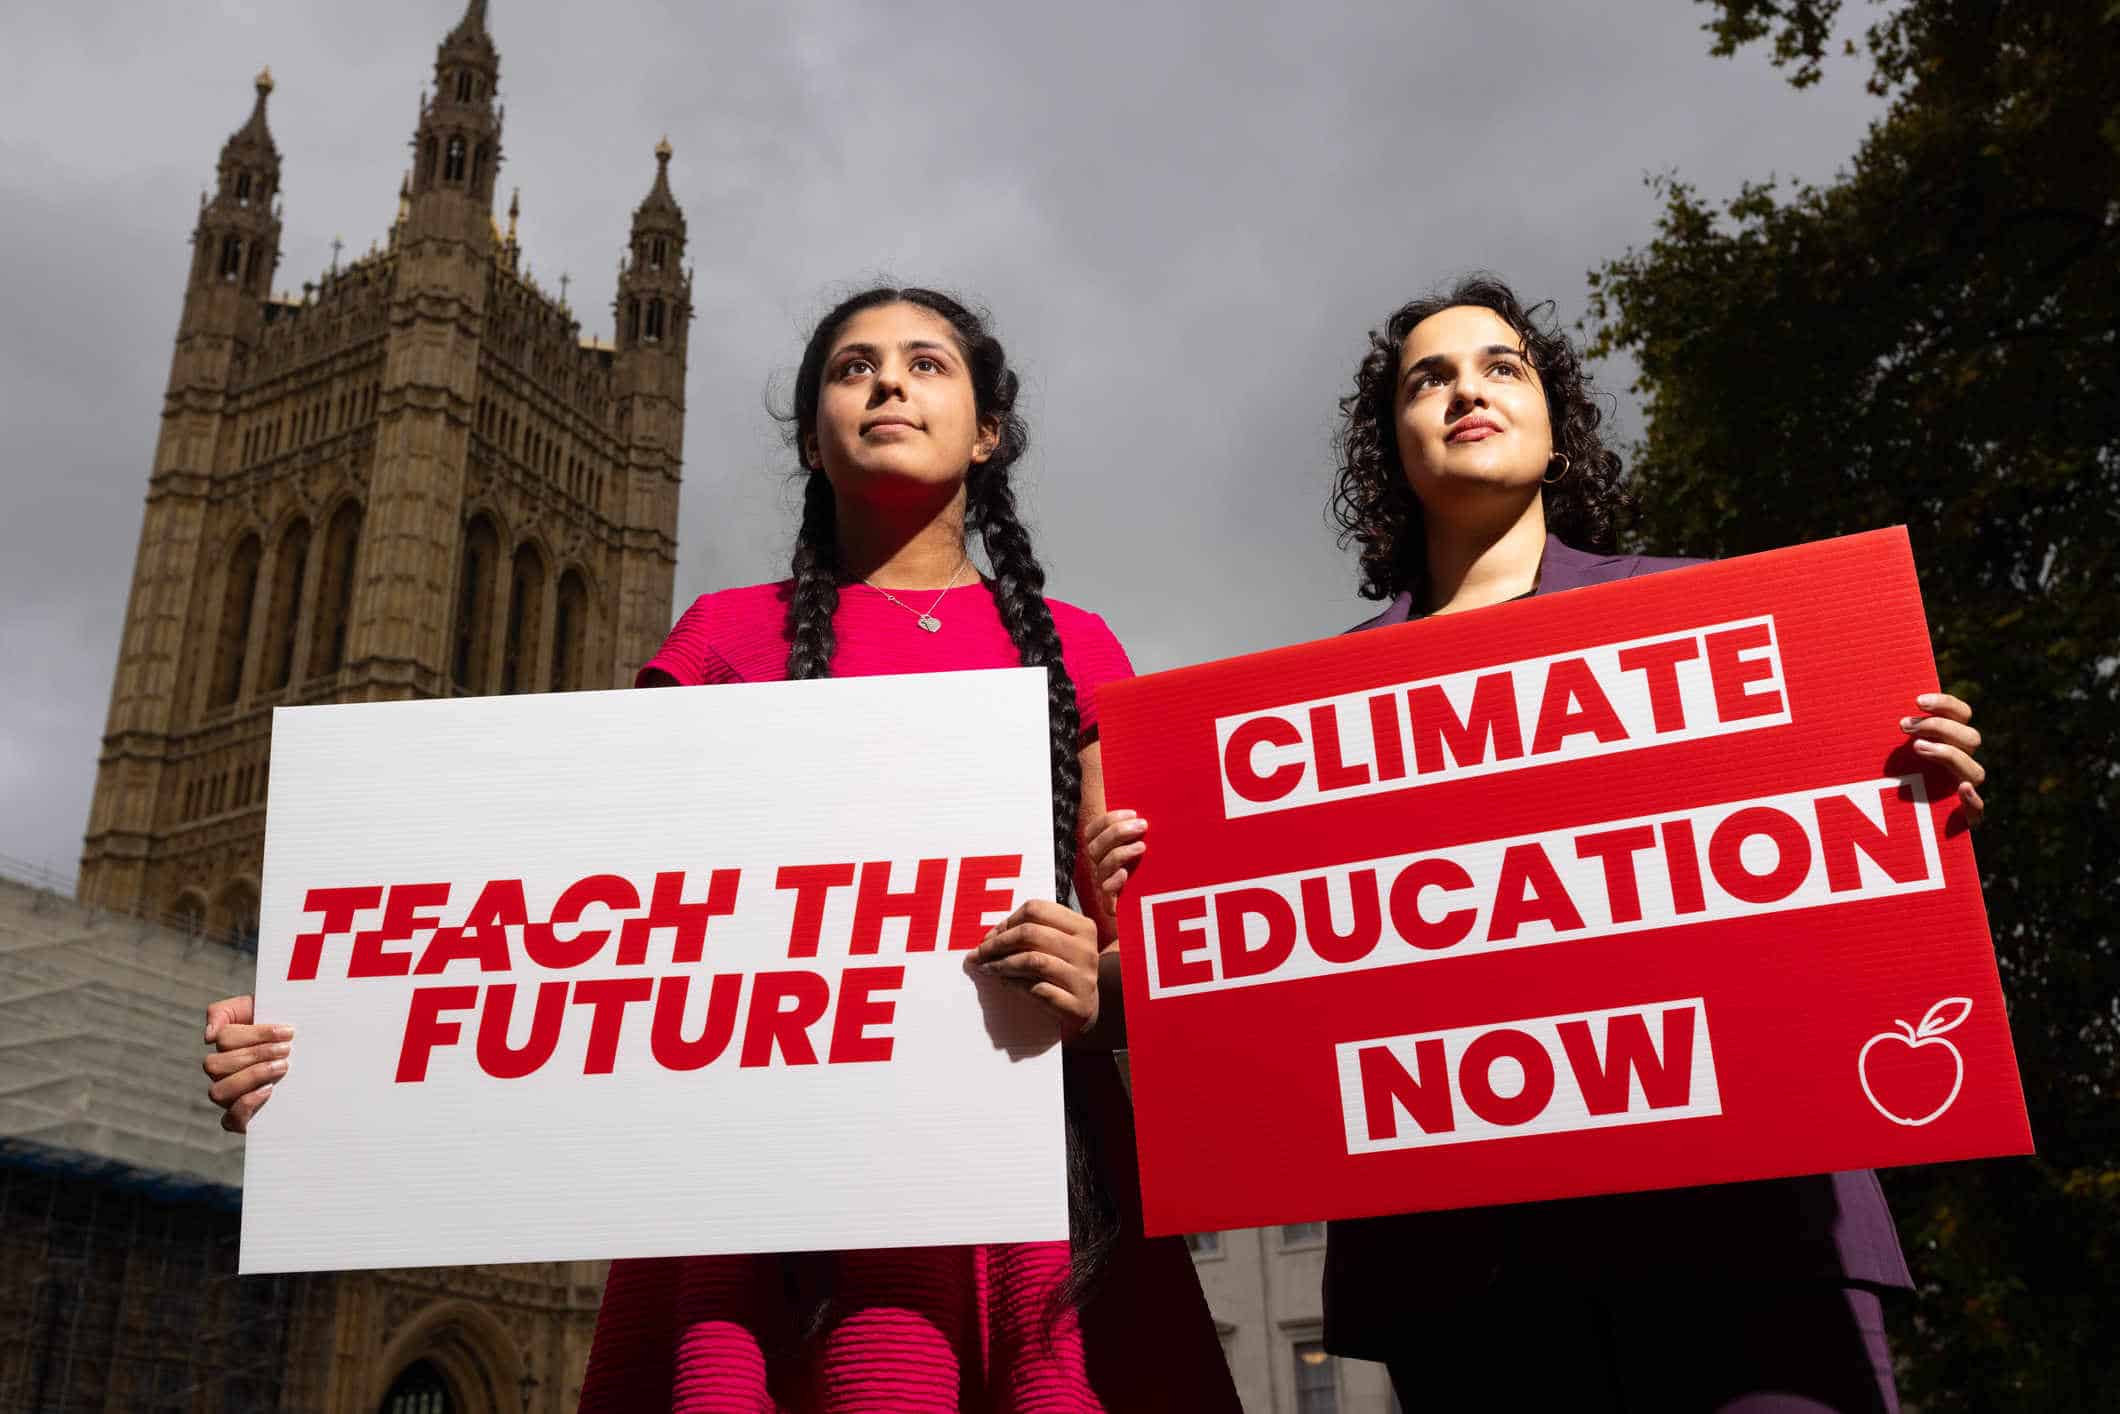 Scarlett Westbrook and Nadia Whittome hold Teach the Future placardass before the parliamentary reception.